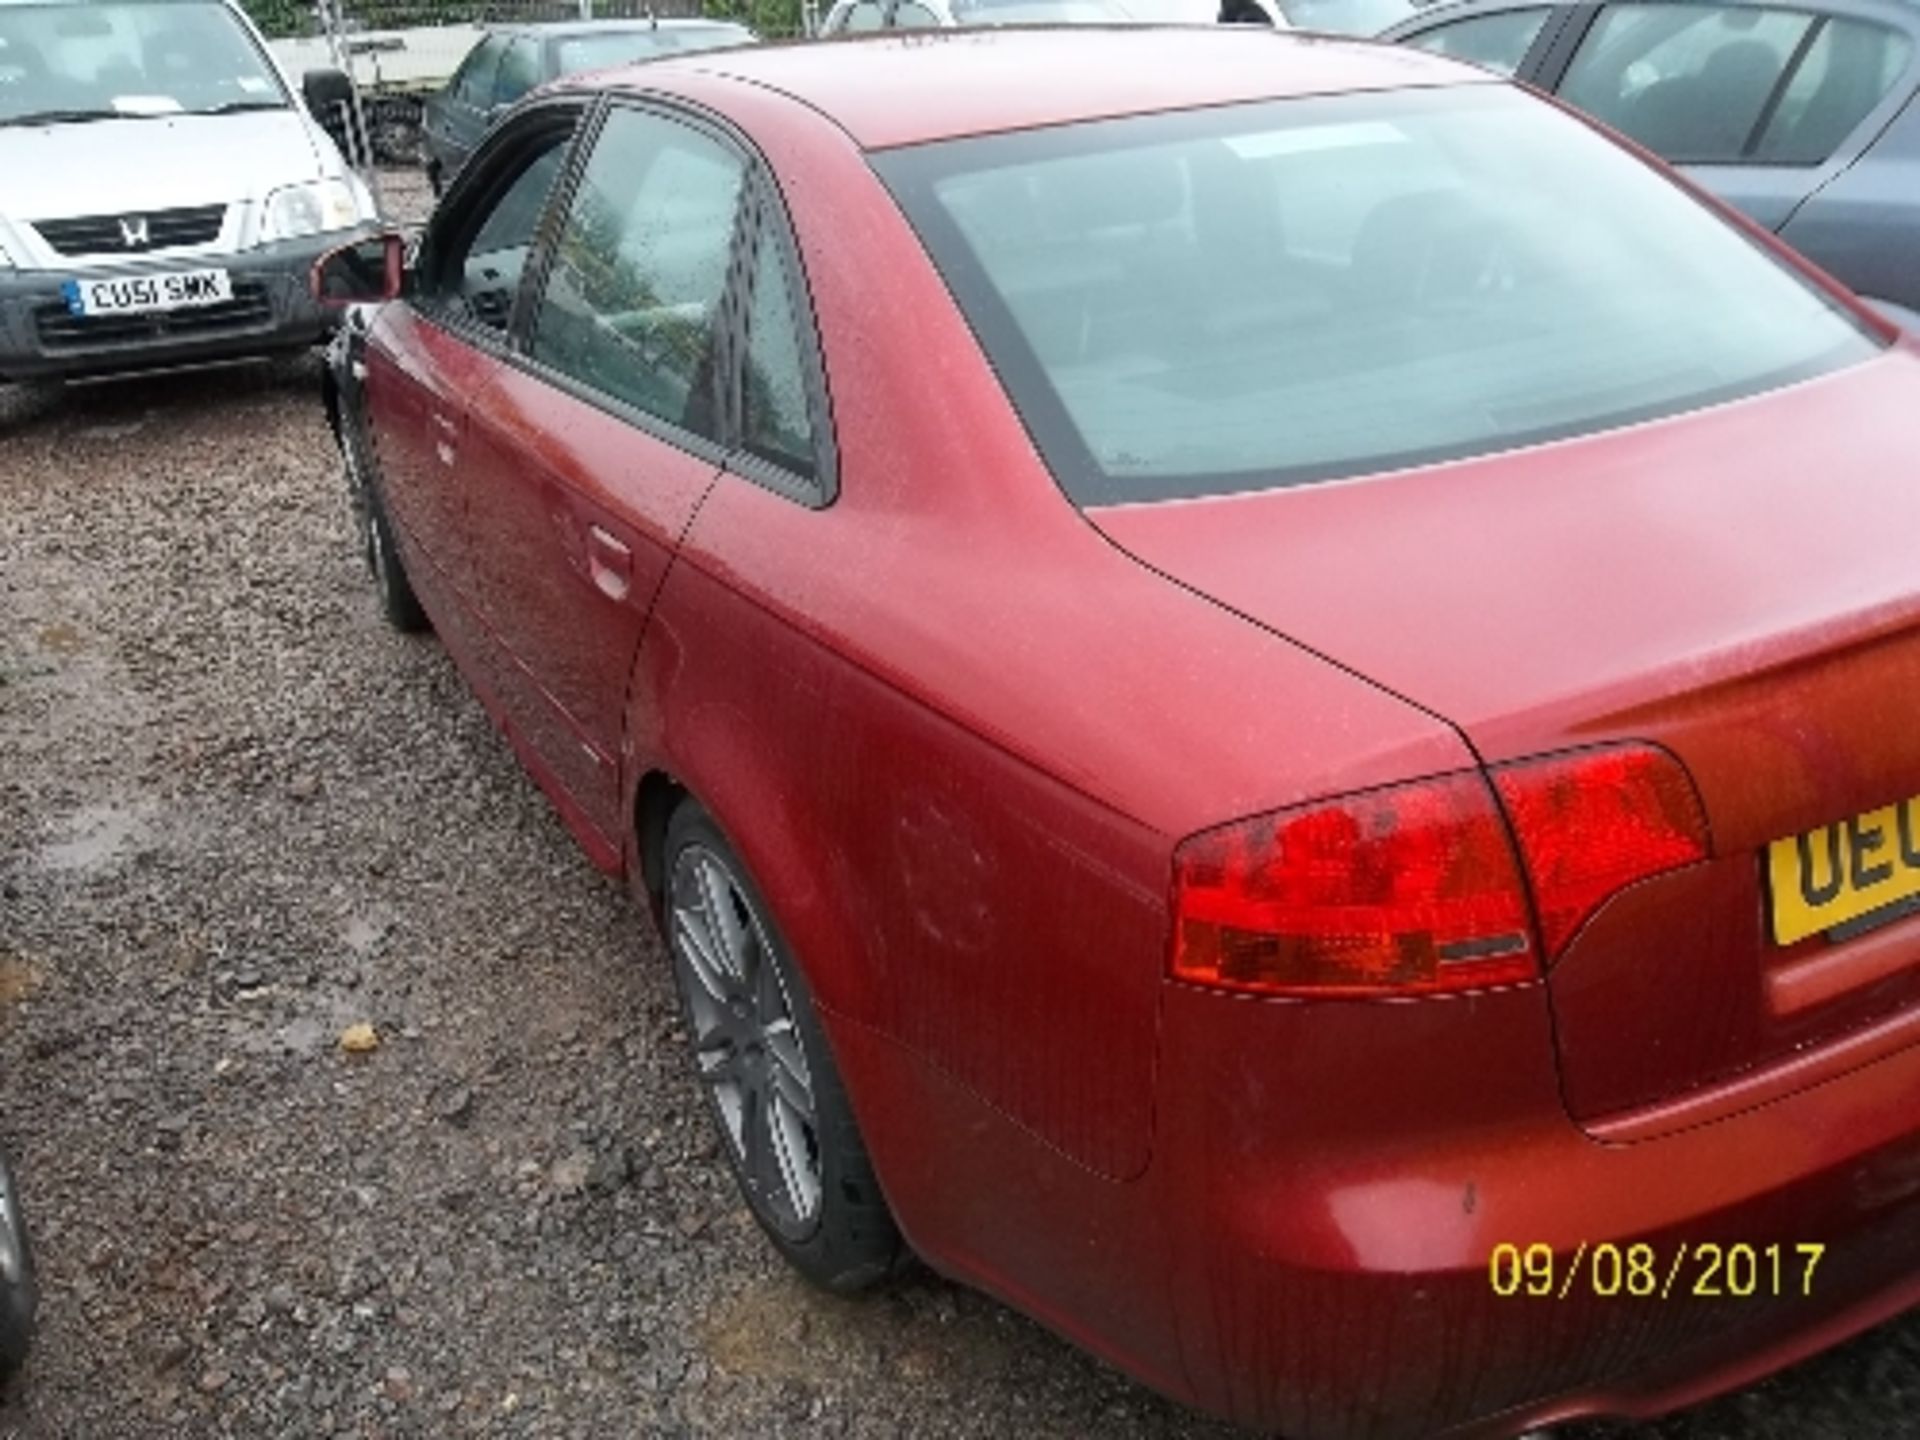 Audi A4 S Line SE TDI - OE07 HXL Date of registration: 05.06.2007 1986cc, diesel, manual, red - Image 5 of 5